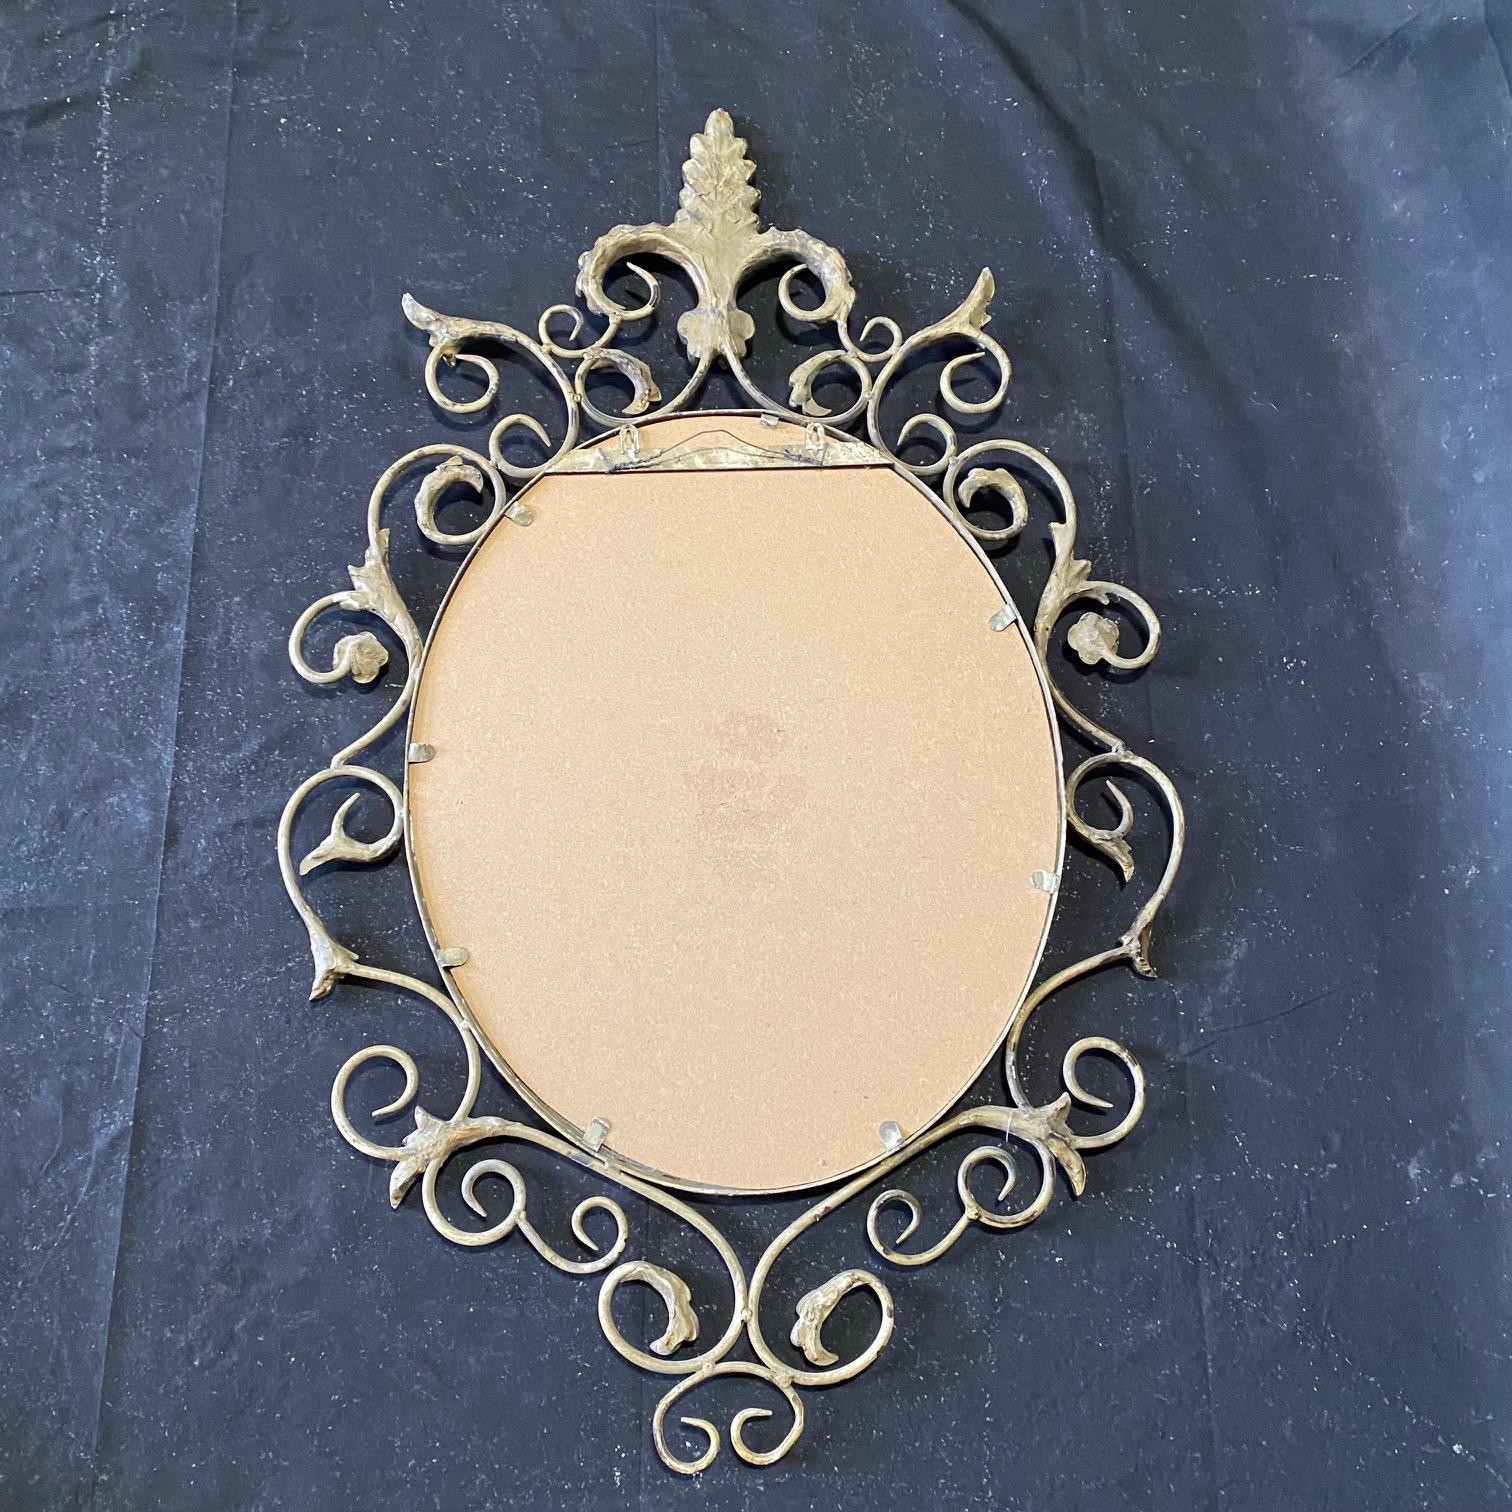 Pair of French Mid Century Fleur de Lis Scrolled Oval Beveled Wall Mirrors For Sale 4